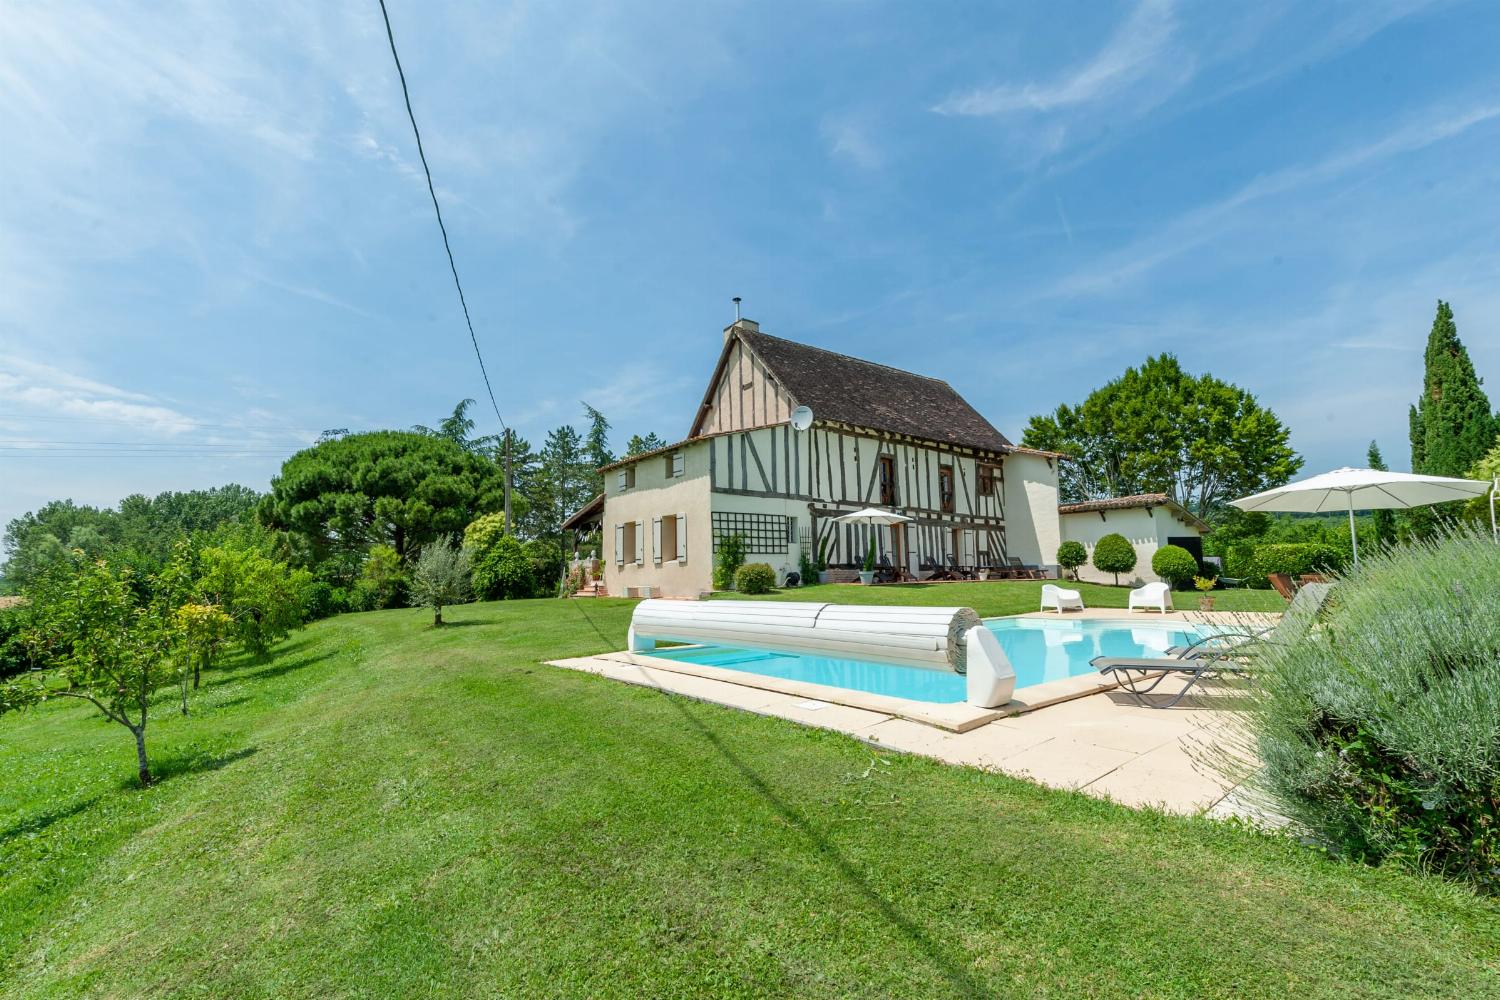 Rental home in Lot-et-Garonne with private heated pool